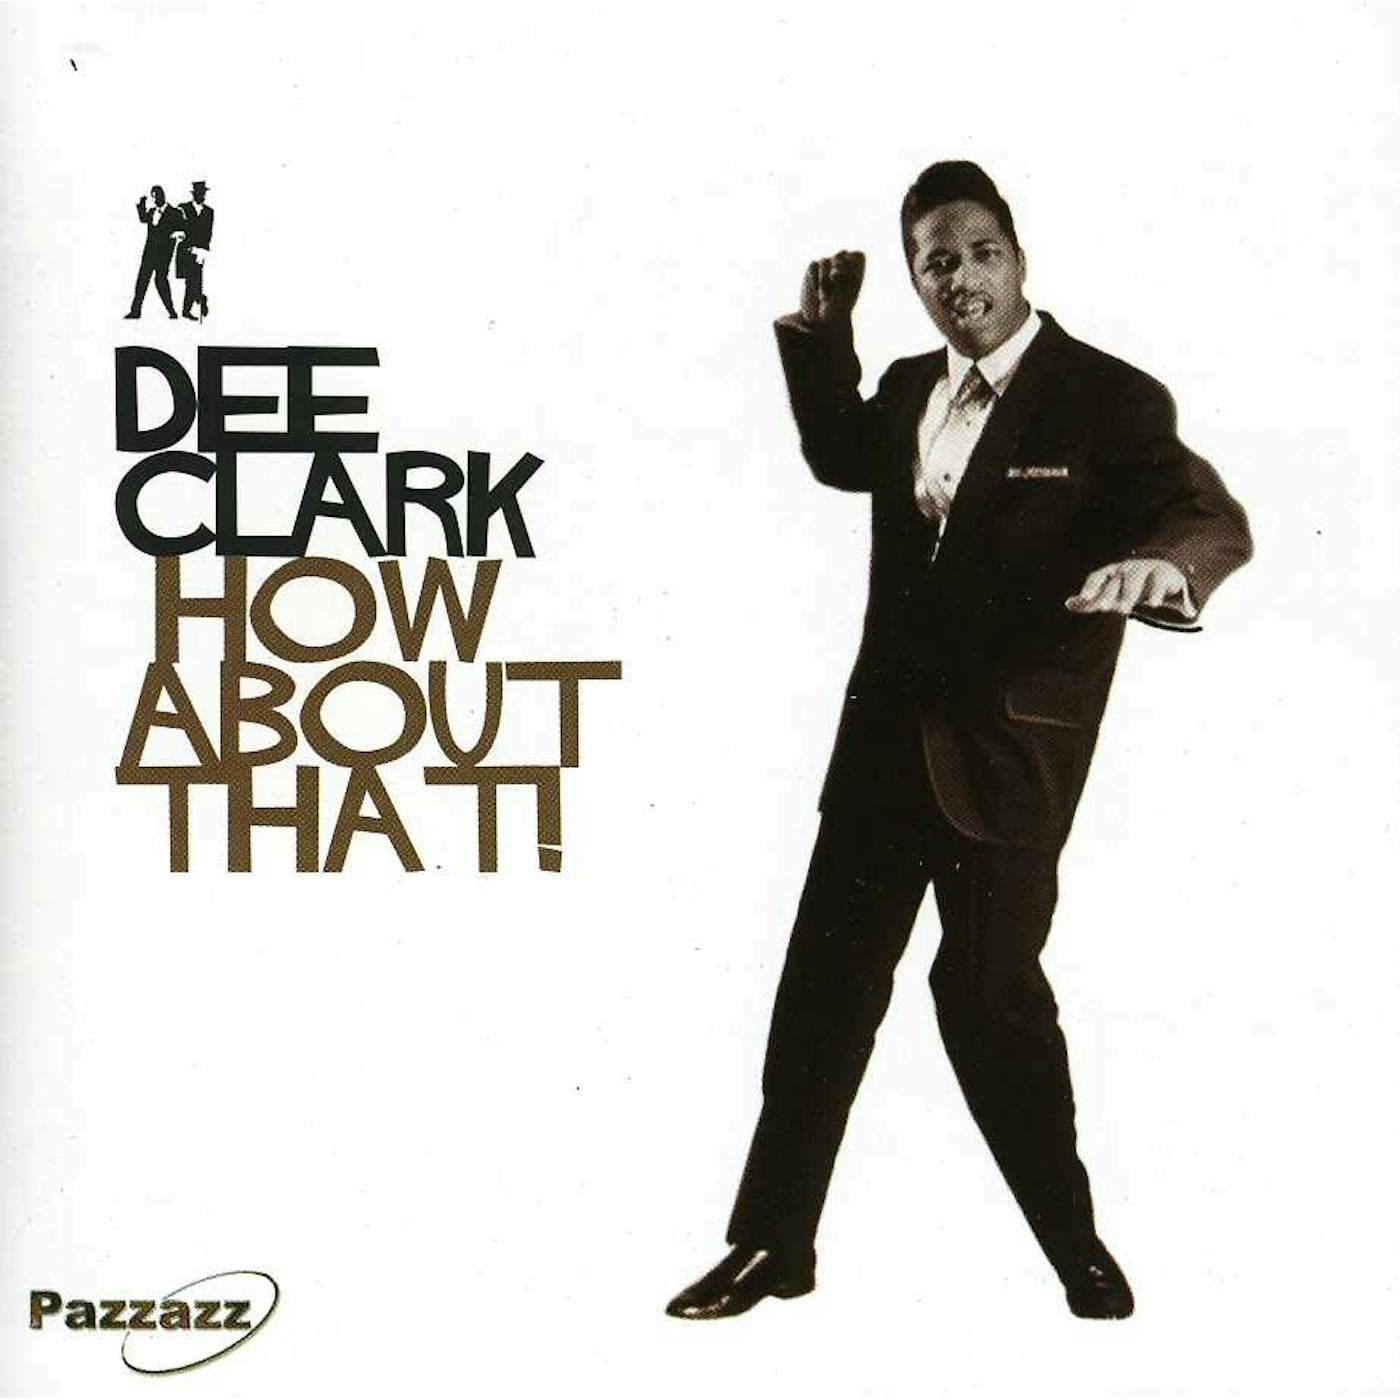 Dee Clark HOW ABOUT THAT CD